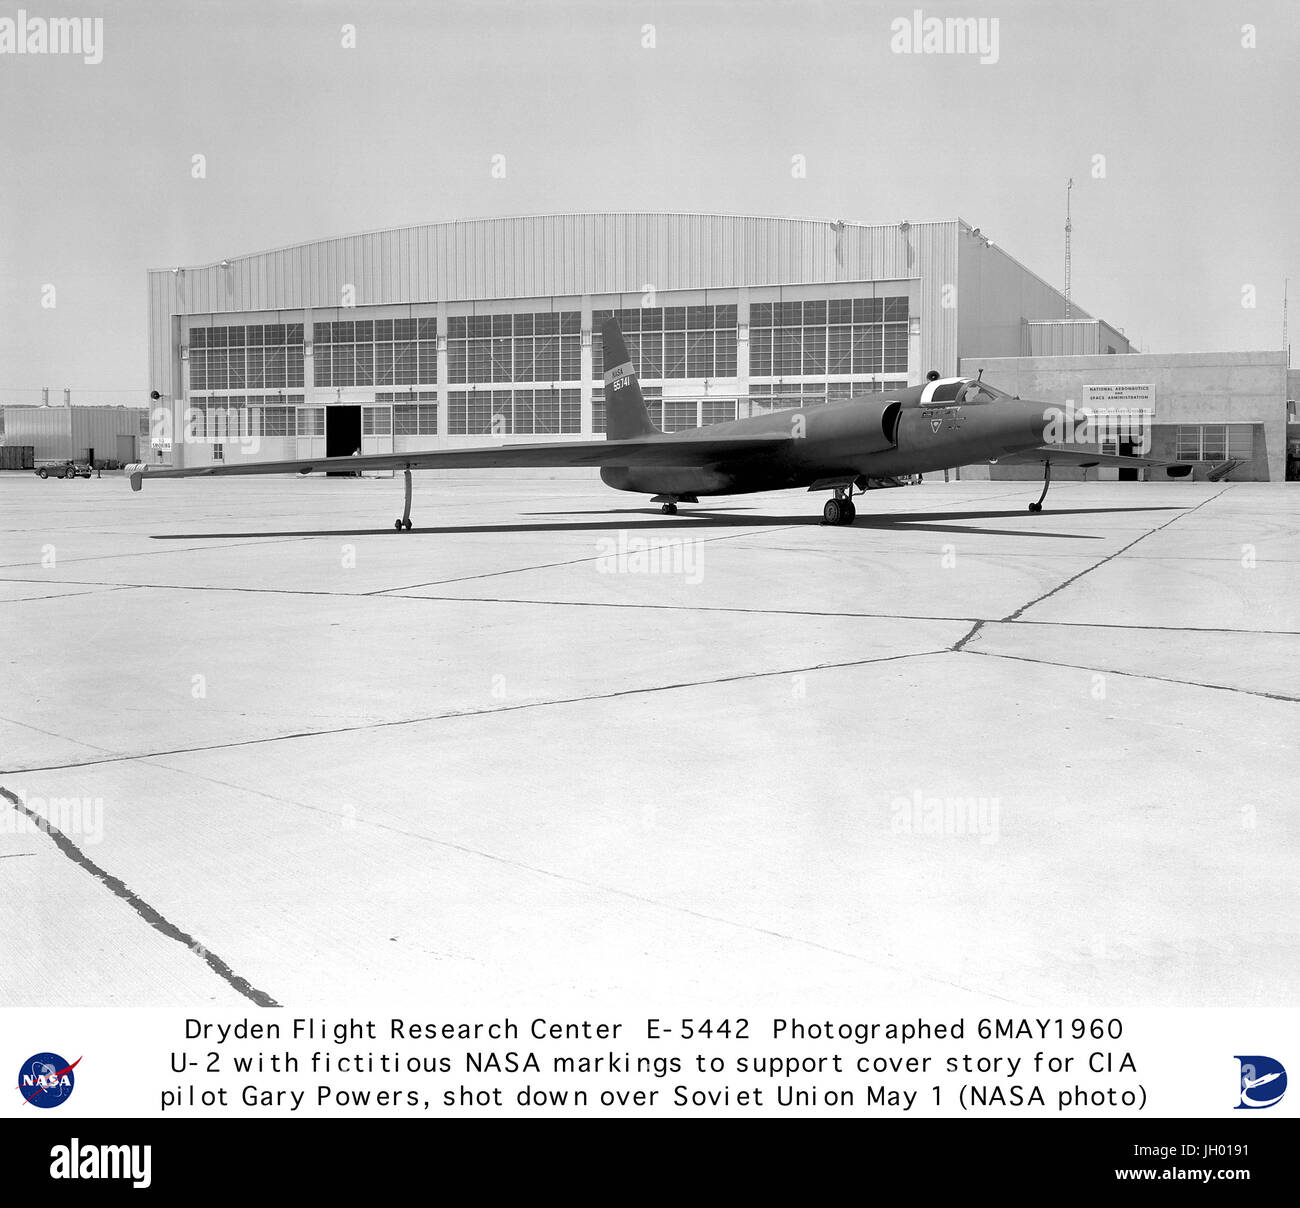 After Francis Gary Powers was shot down over the Soviet Union during a CIA spy flight on 1 May 1960, NASA issued a press release with a cover story about a U-2 conducting weather research that may have strayed off course after the pilot 'reported difficulties with his oxygen equipment.'To bolster the cover-up, a U-2 was quickly painted in NASA markings, with a fictitious NASA serial number, and put on display for the news media at the NASA Flight Research Center at Edwards Air Force Base on 6 May 1960. The next day, Soviet Premier Nikita Kruschev exposed the cover-up by revealing that the pilo Stock Photo